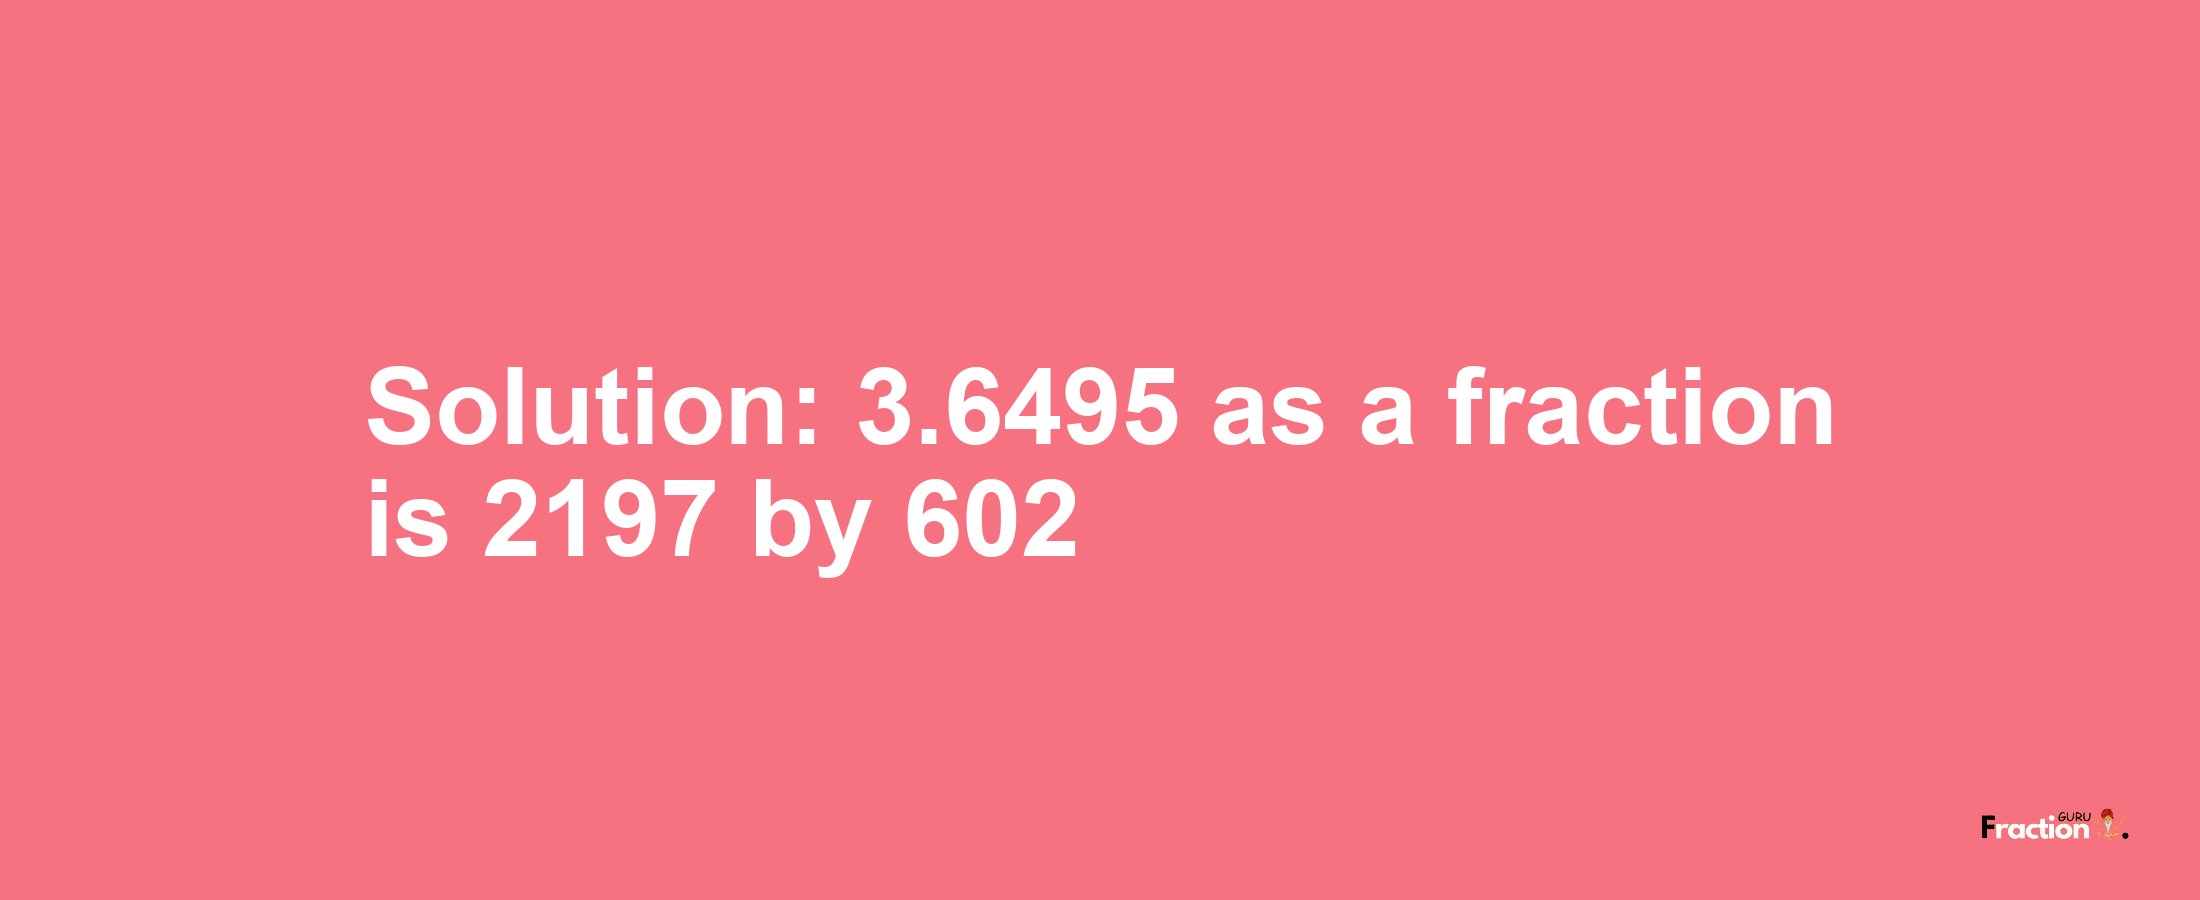 Solution:3.6495 as a fraction is 2197/602